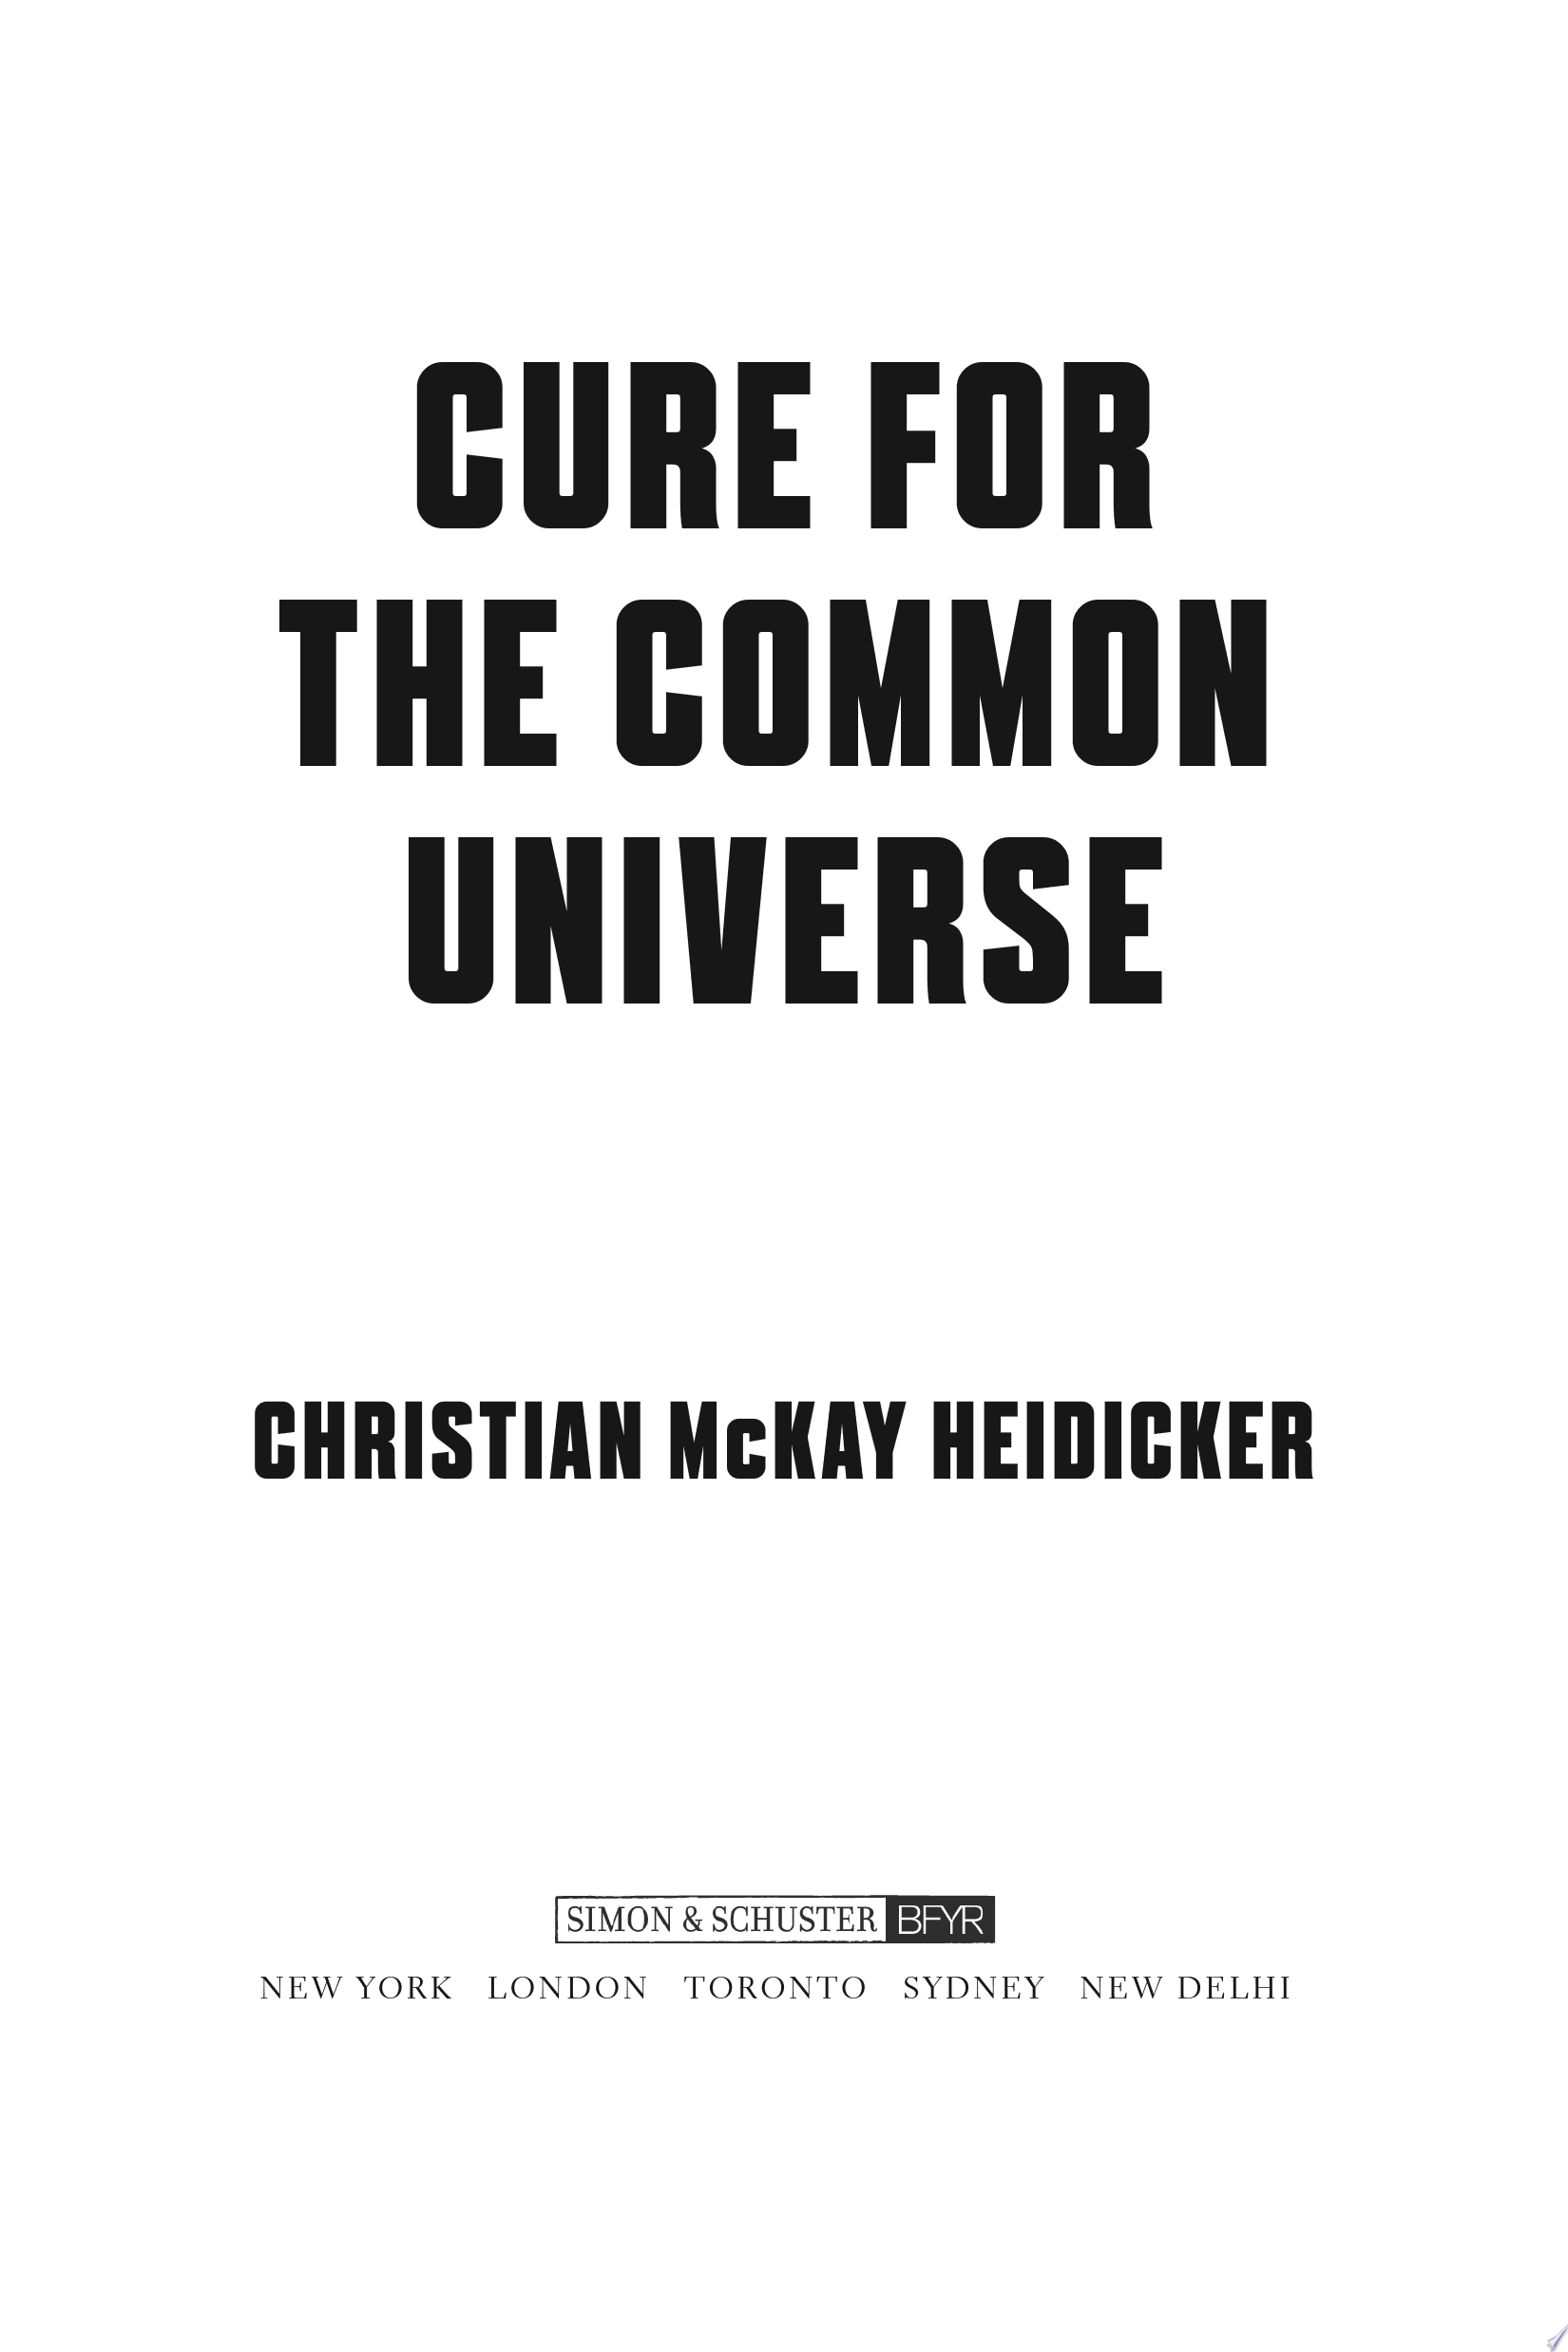 Image for "Cure for the Common Universe"